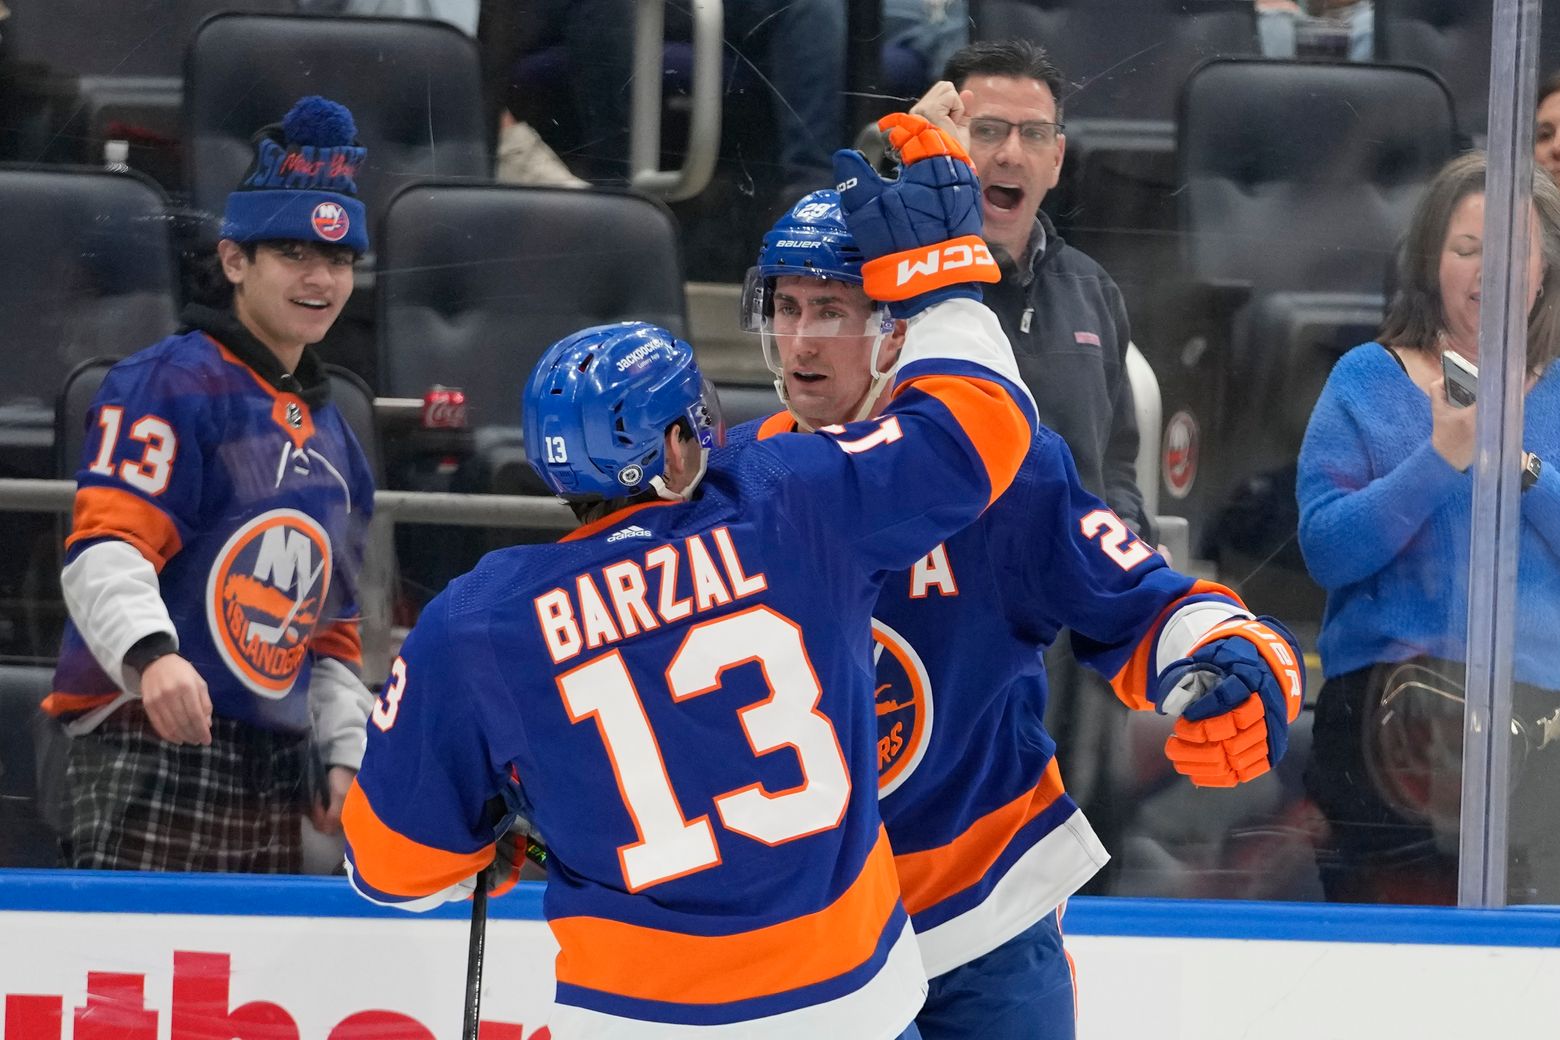 Palmieri, Barzal score in win for Isles in Horvat's 1st game